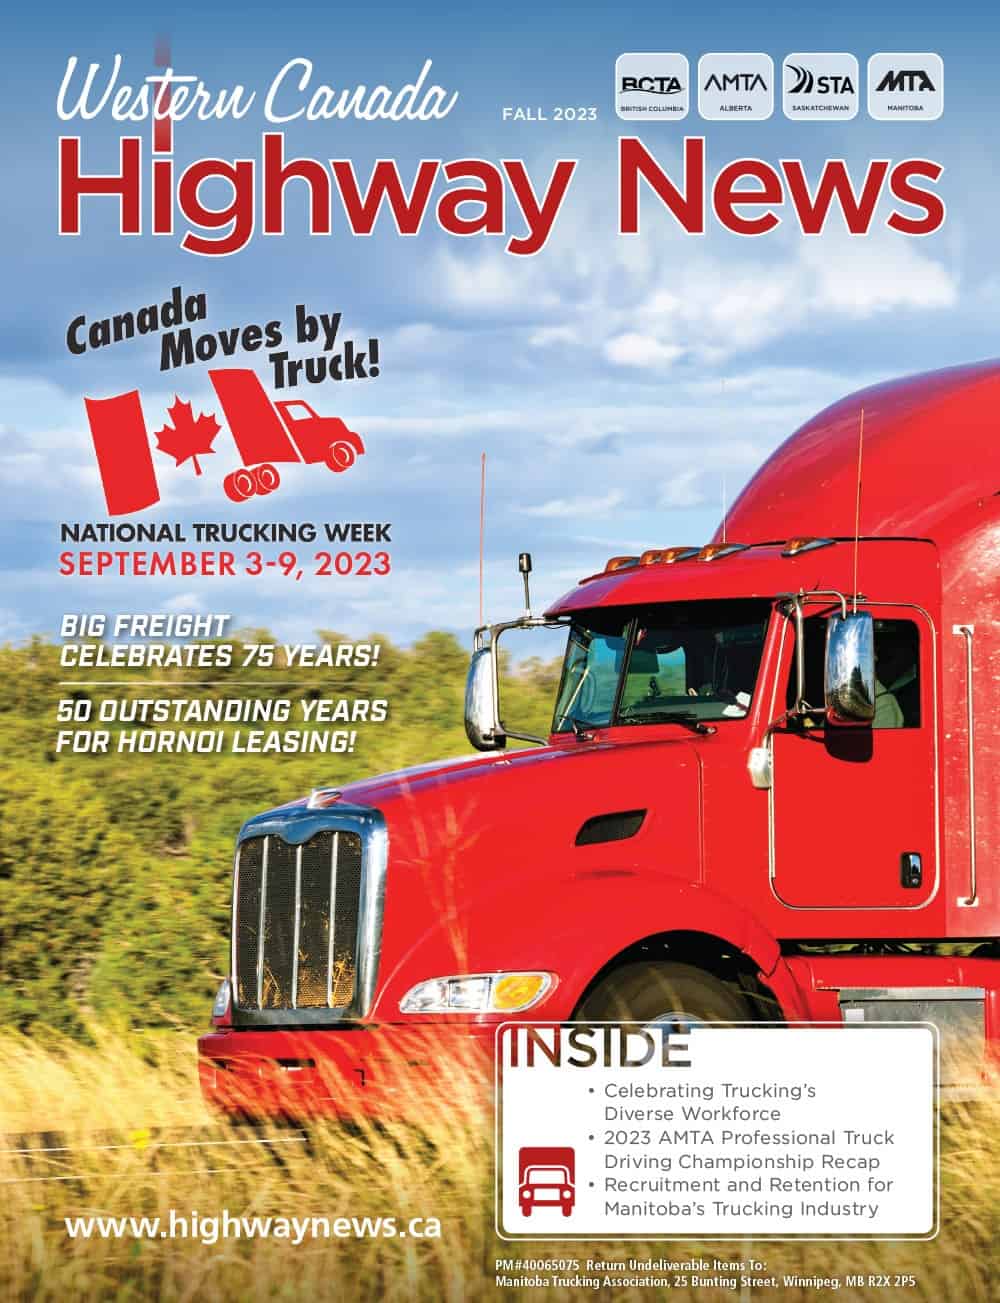 A picture of the Fall 2023 cover of Western Canada Highway News.